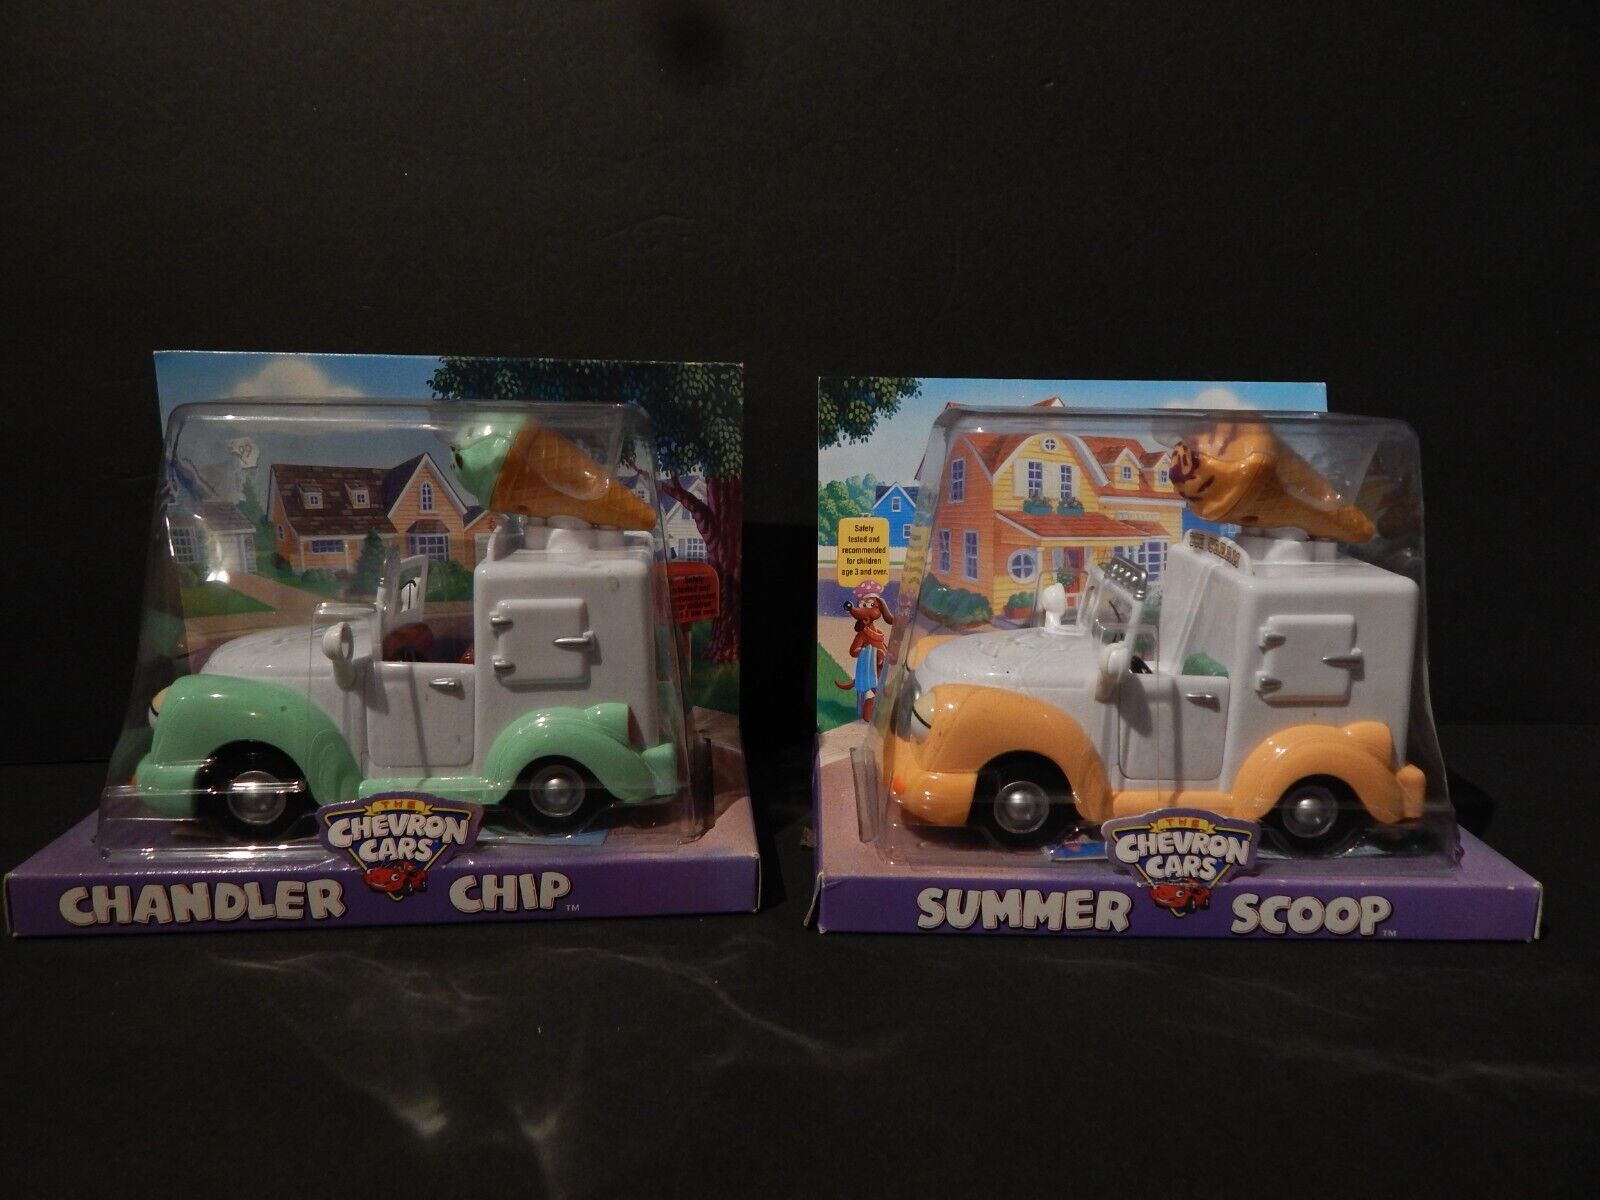 Set of 2 The Chevron Cars Collectibles CHANDLER CHIP & SUMMER SCOOP (2003) - NEW